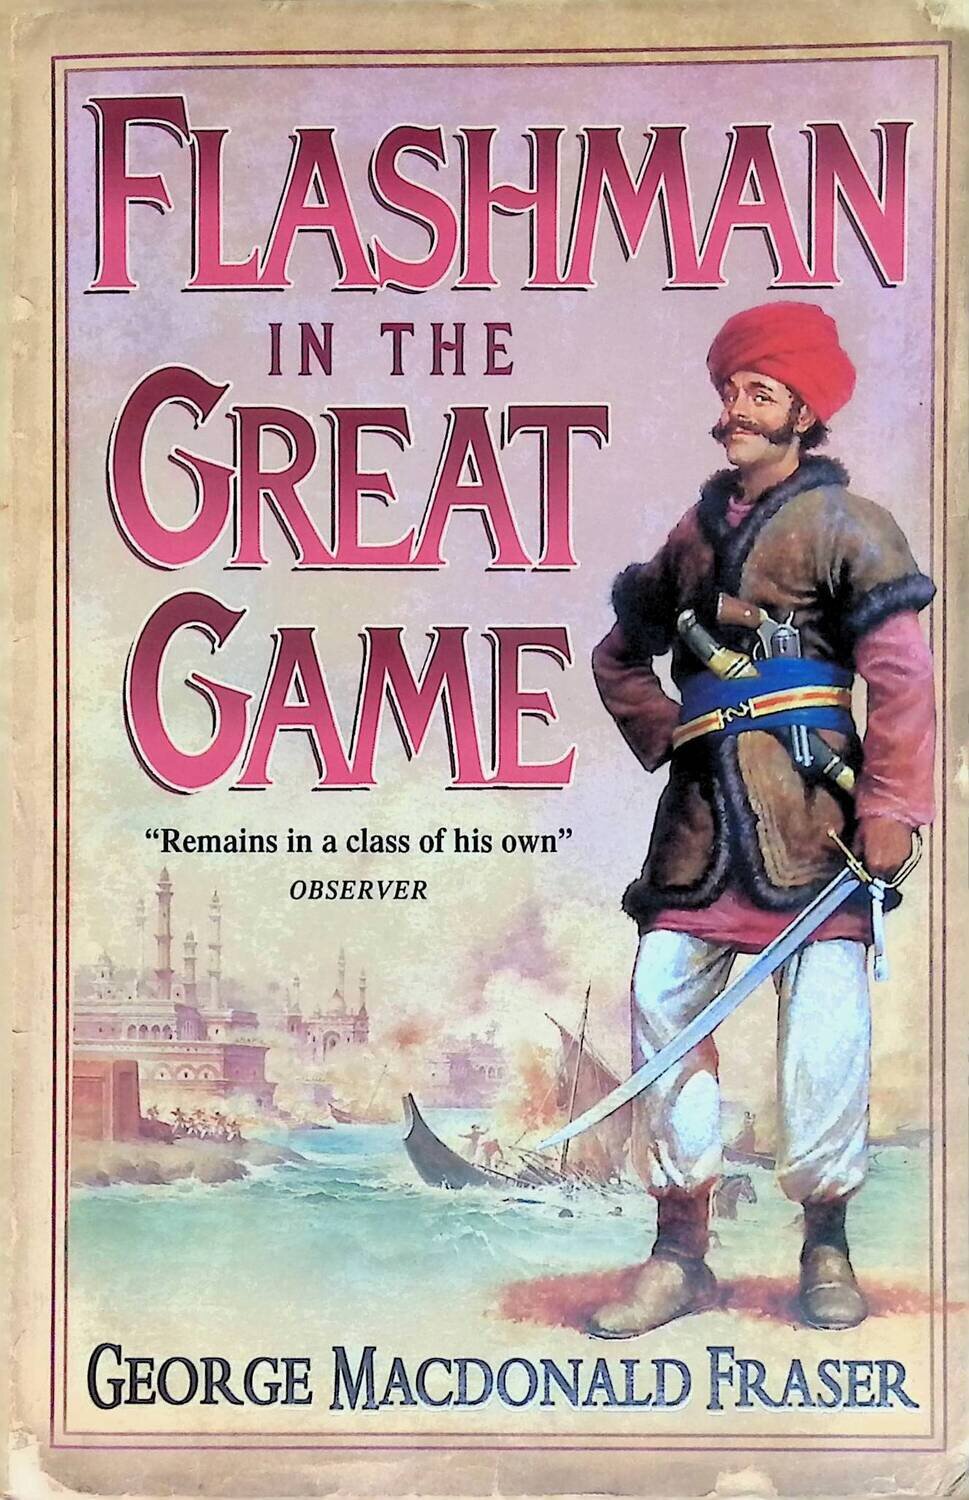 Flashman in the Great Game; George MacDonald Fraser